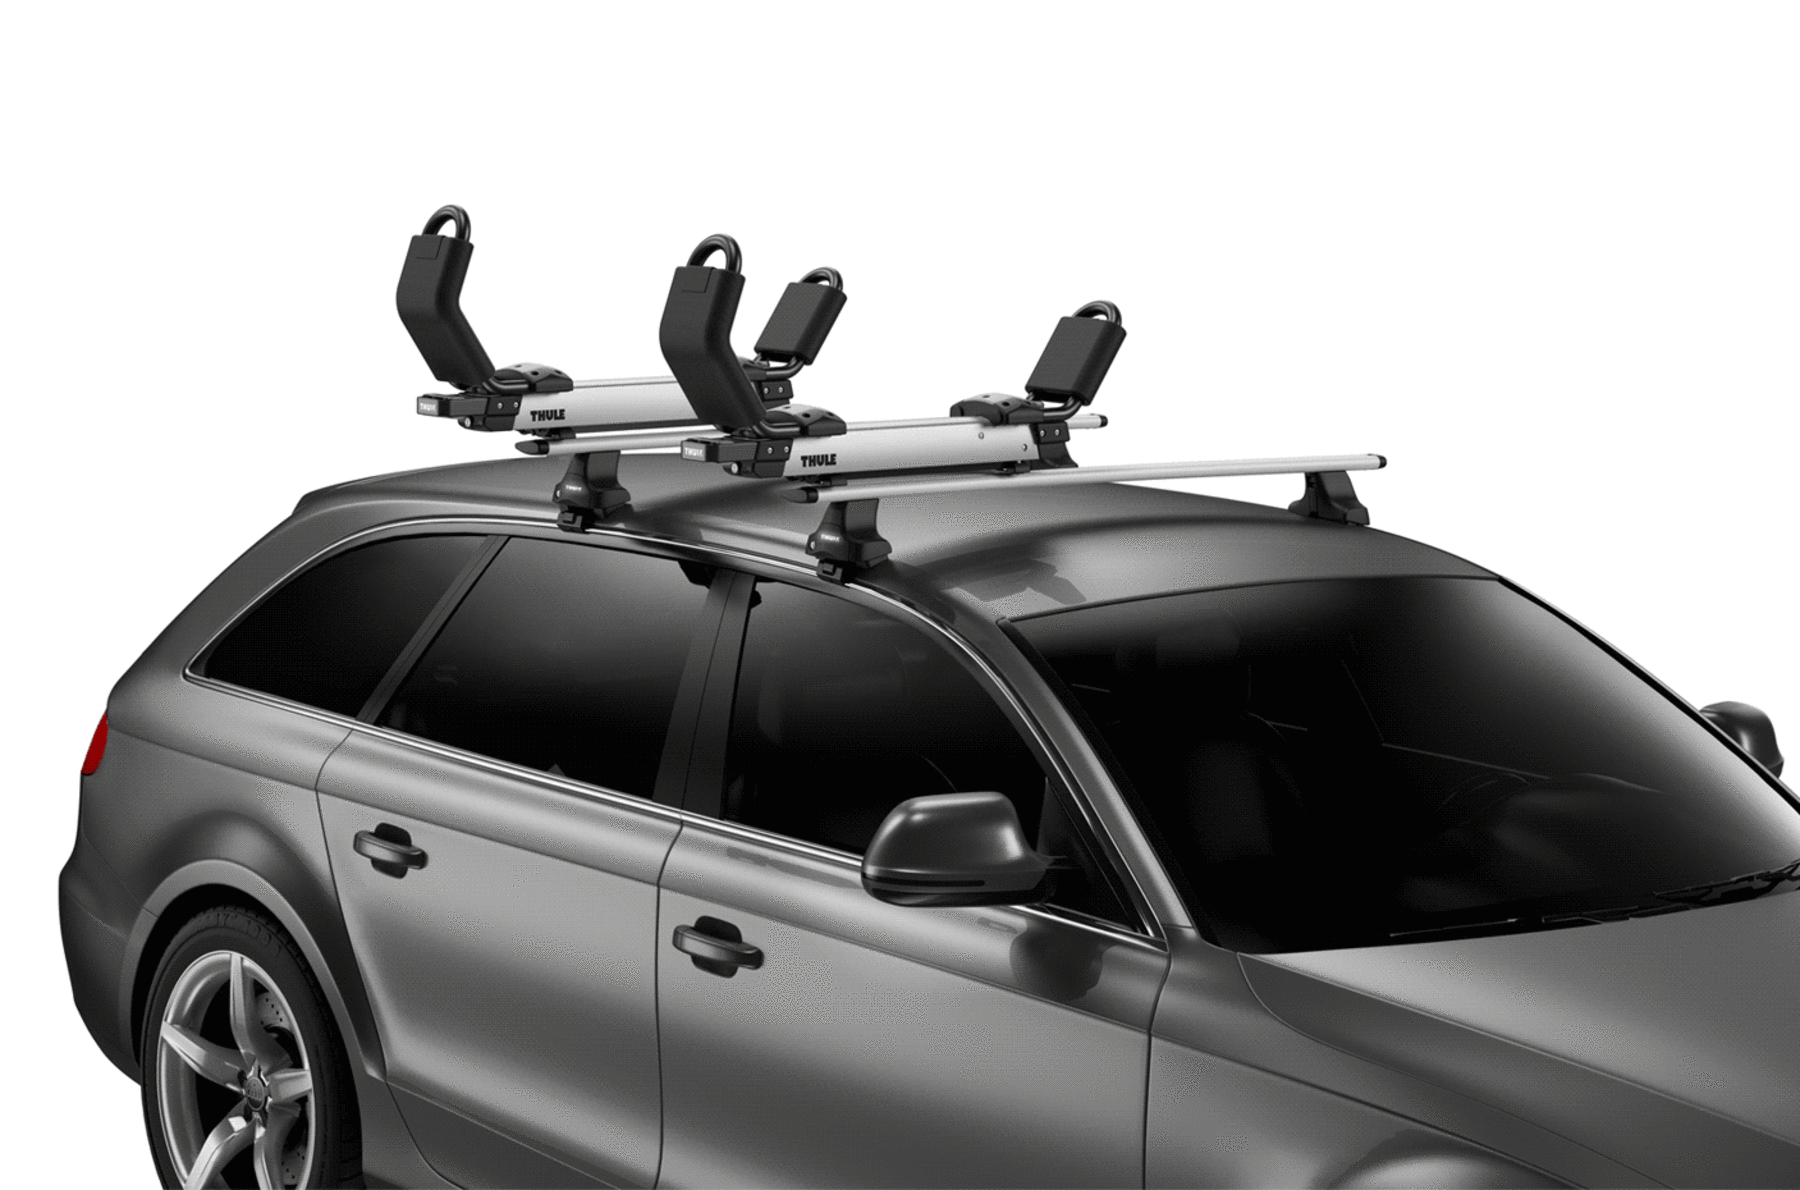 Thule HullAvator Pro 898 Lift Assisted Side Loading Kayak Carrier